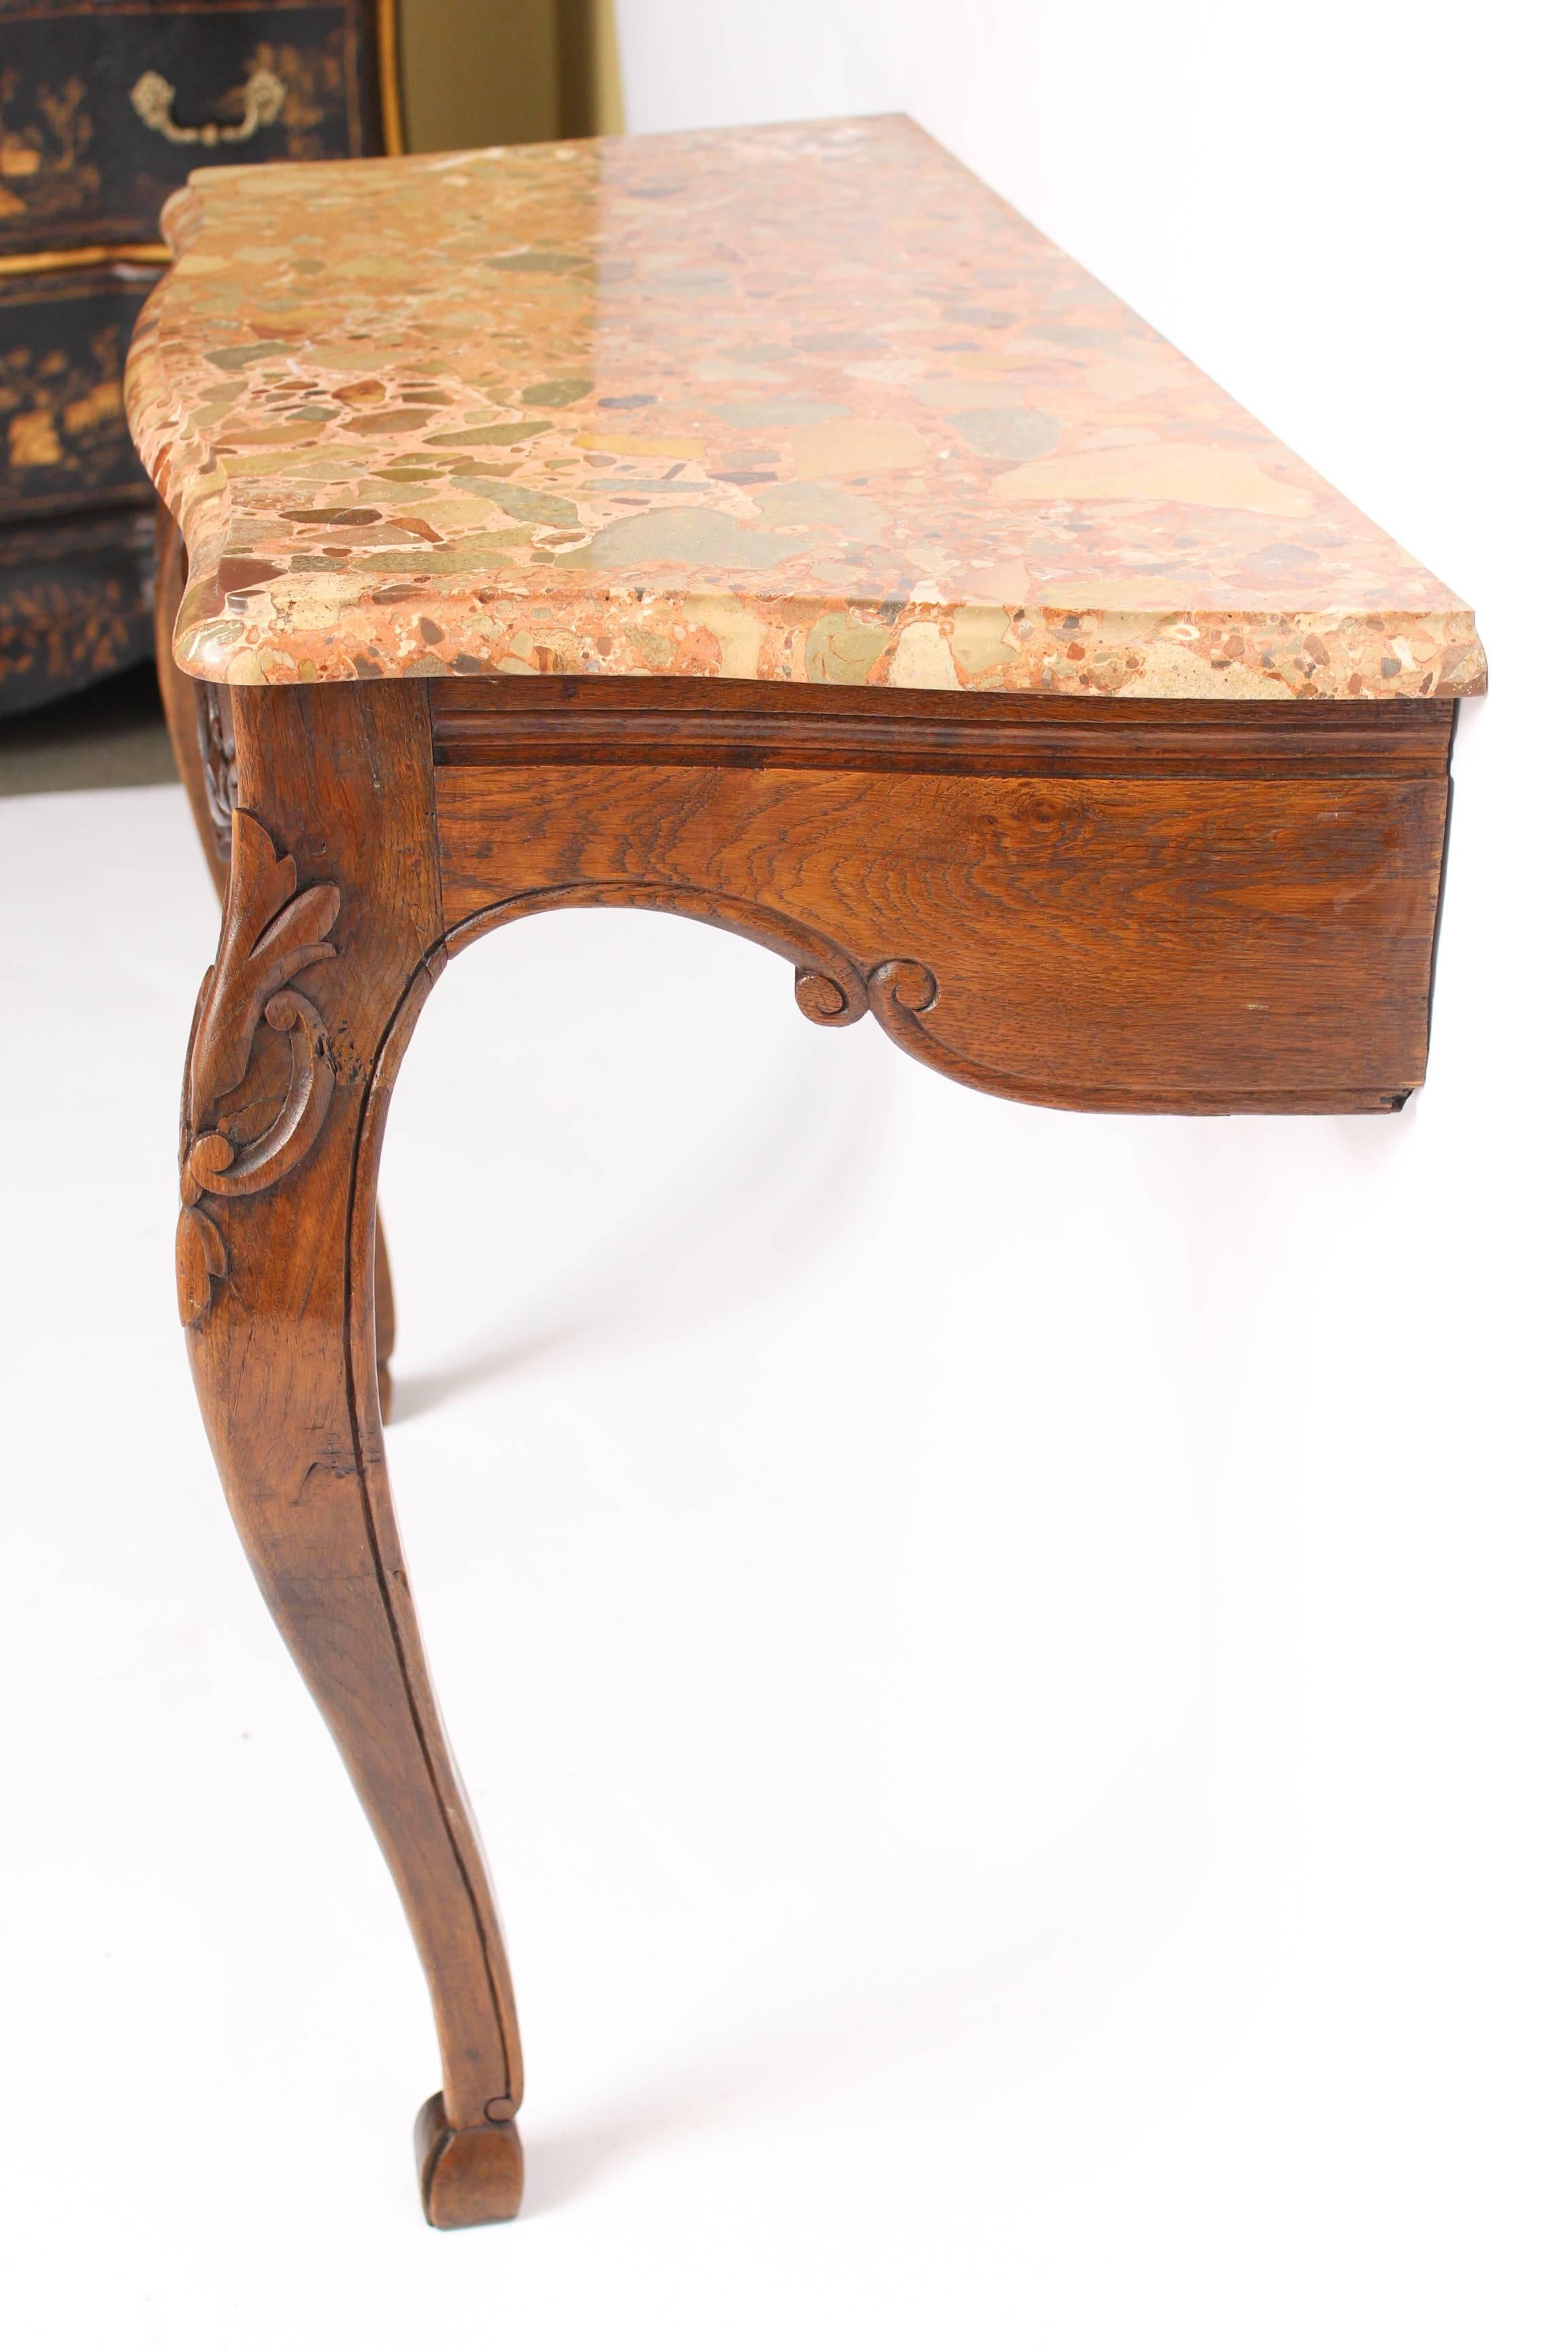 Louis XV provincial style carved oak console table with a marble top, circa 1900.